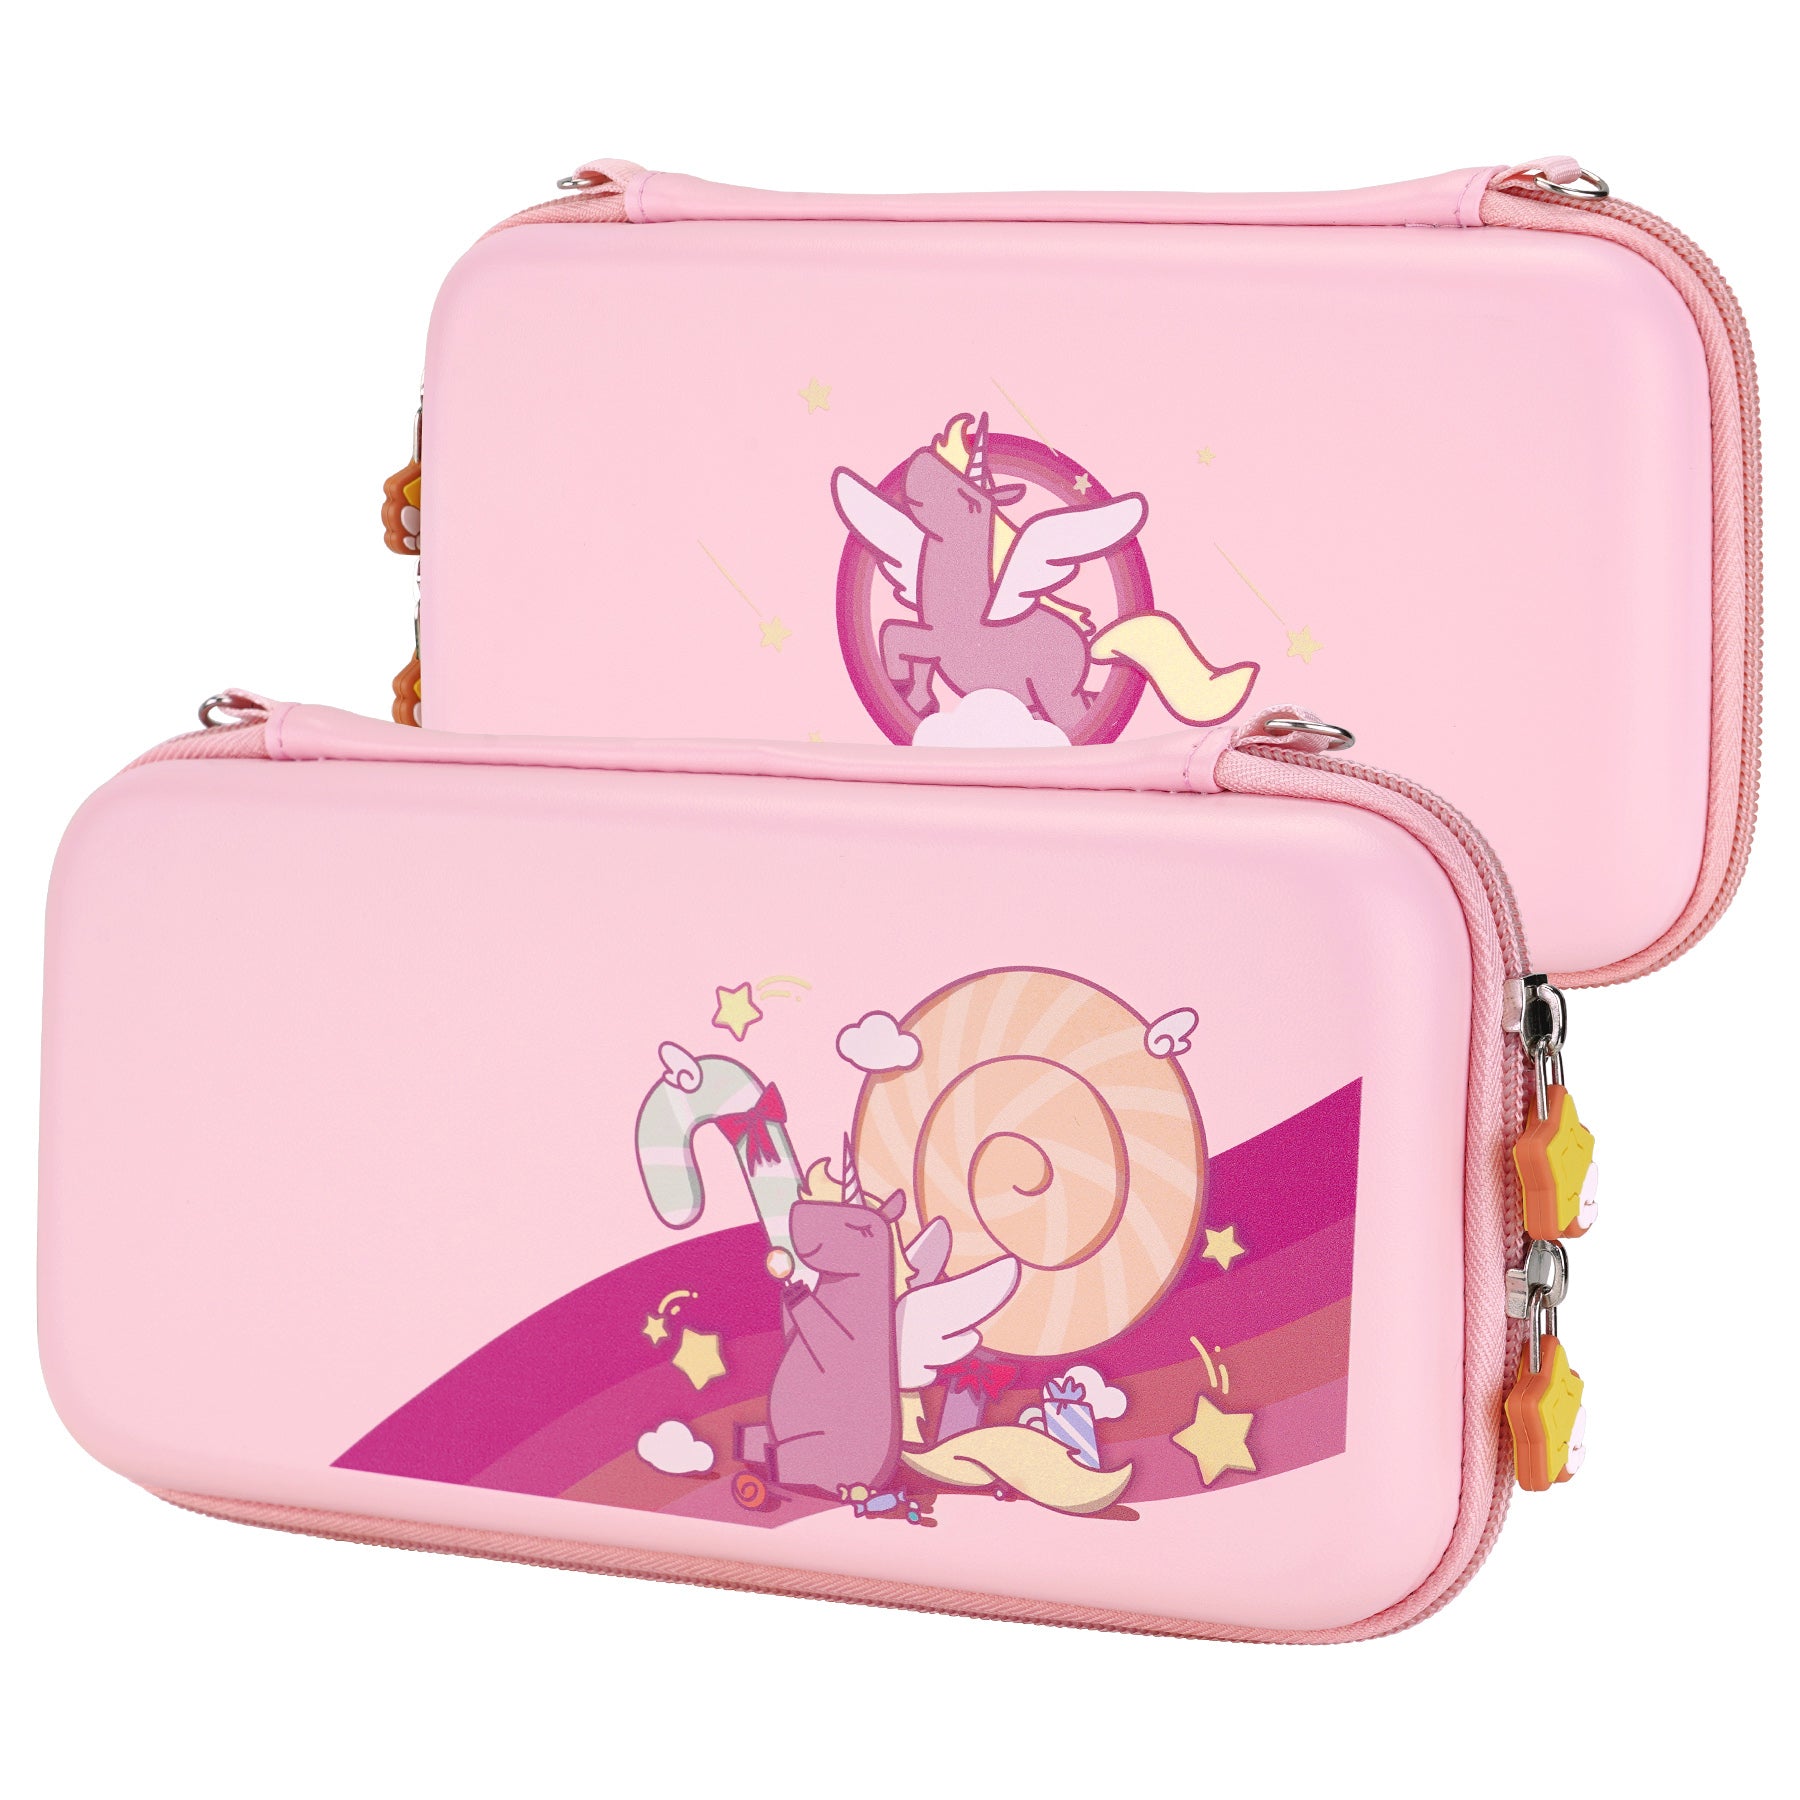 Protective Carrying Case for LUNII Fabulous Storyteller, Compatible with  Lunii 1 and Lunii 2, Shock Resistant, Pink